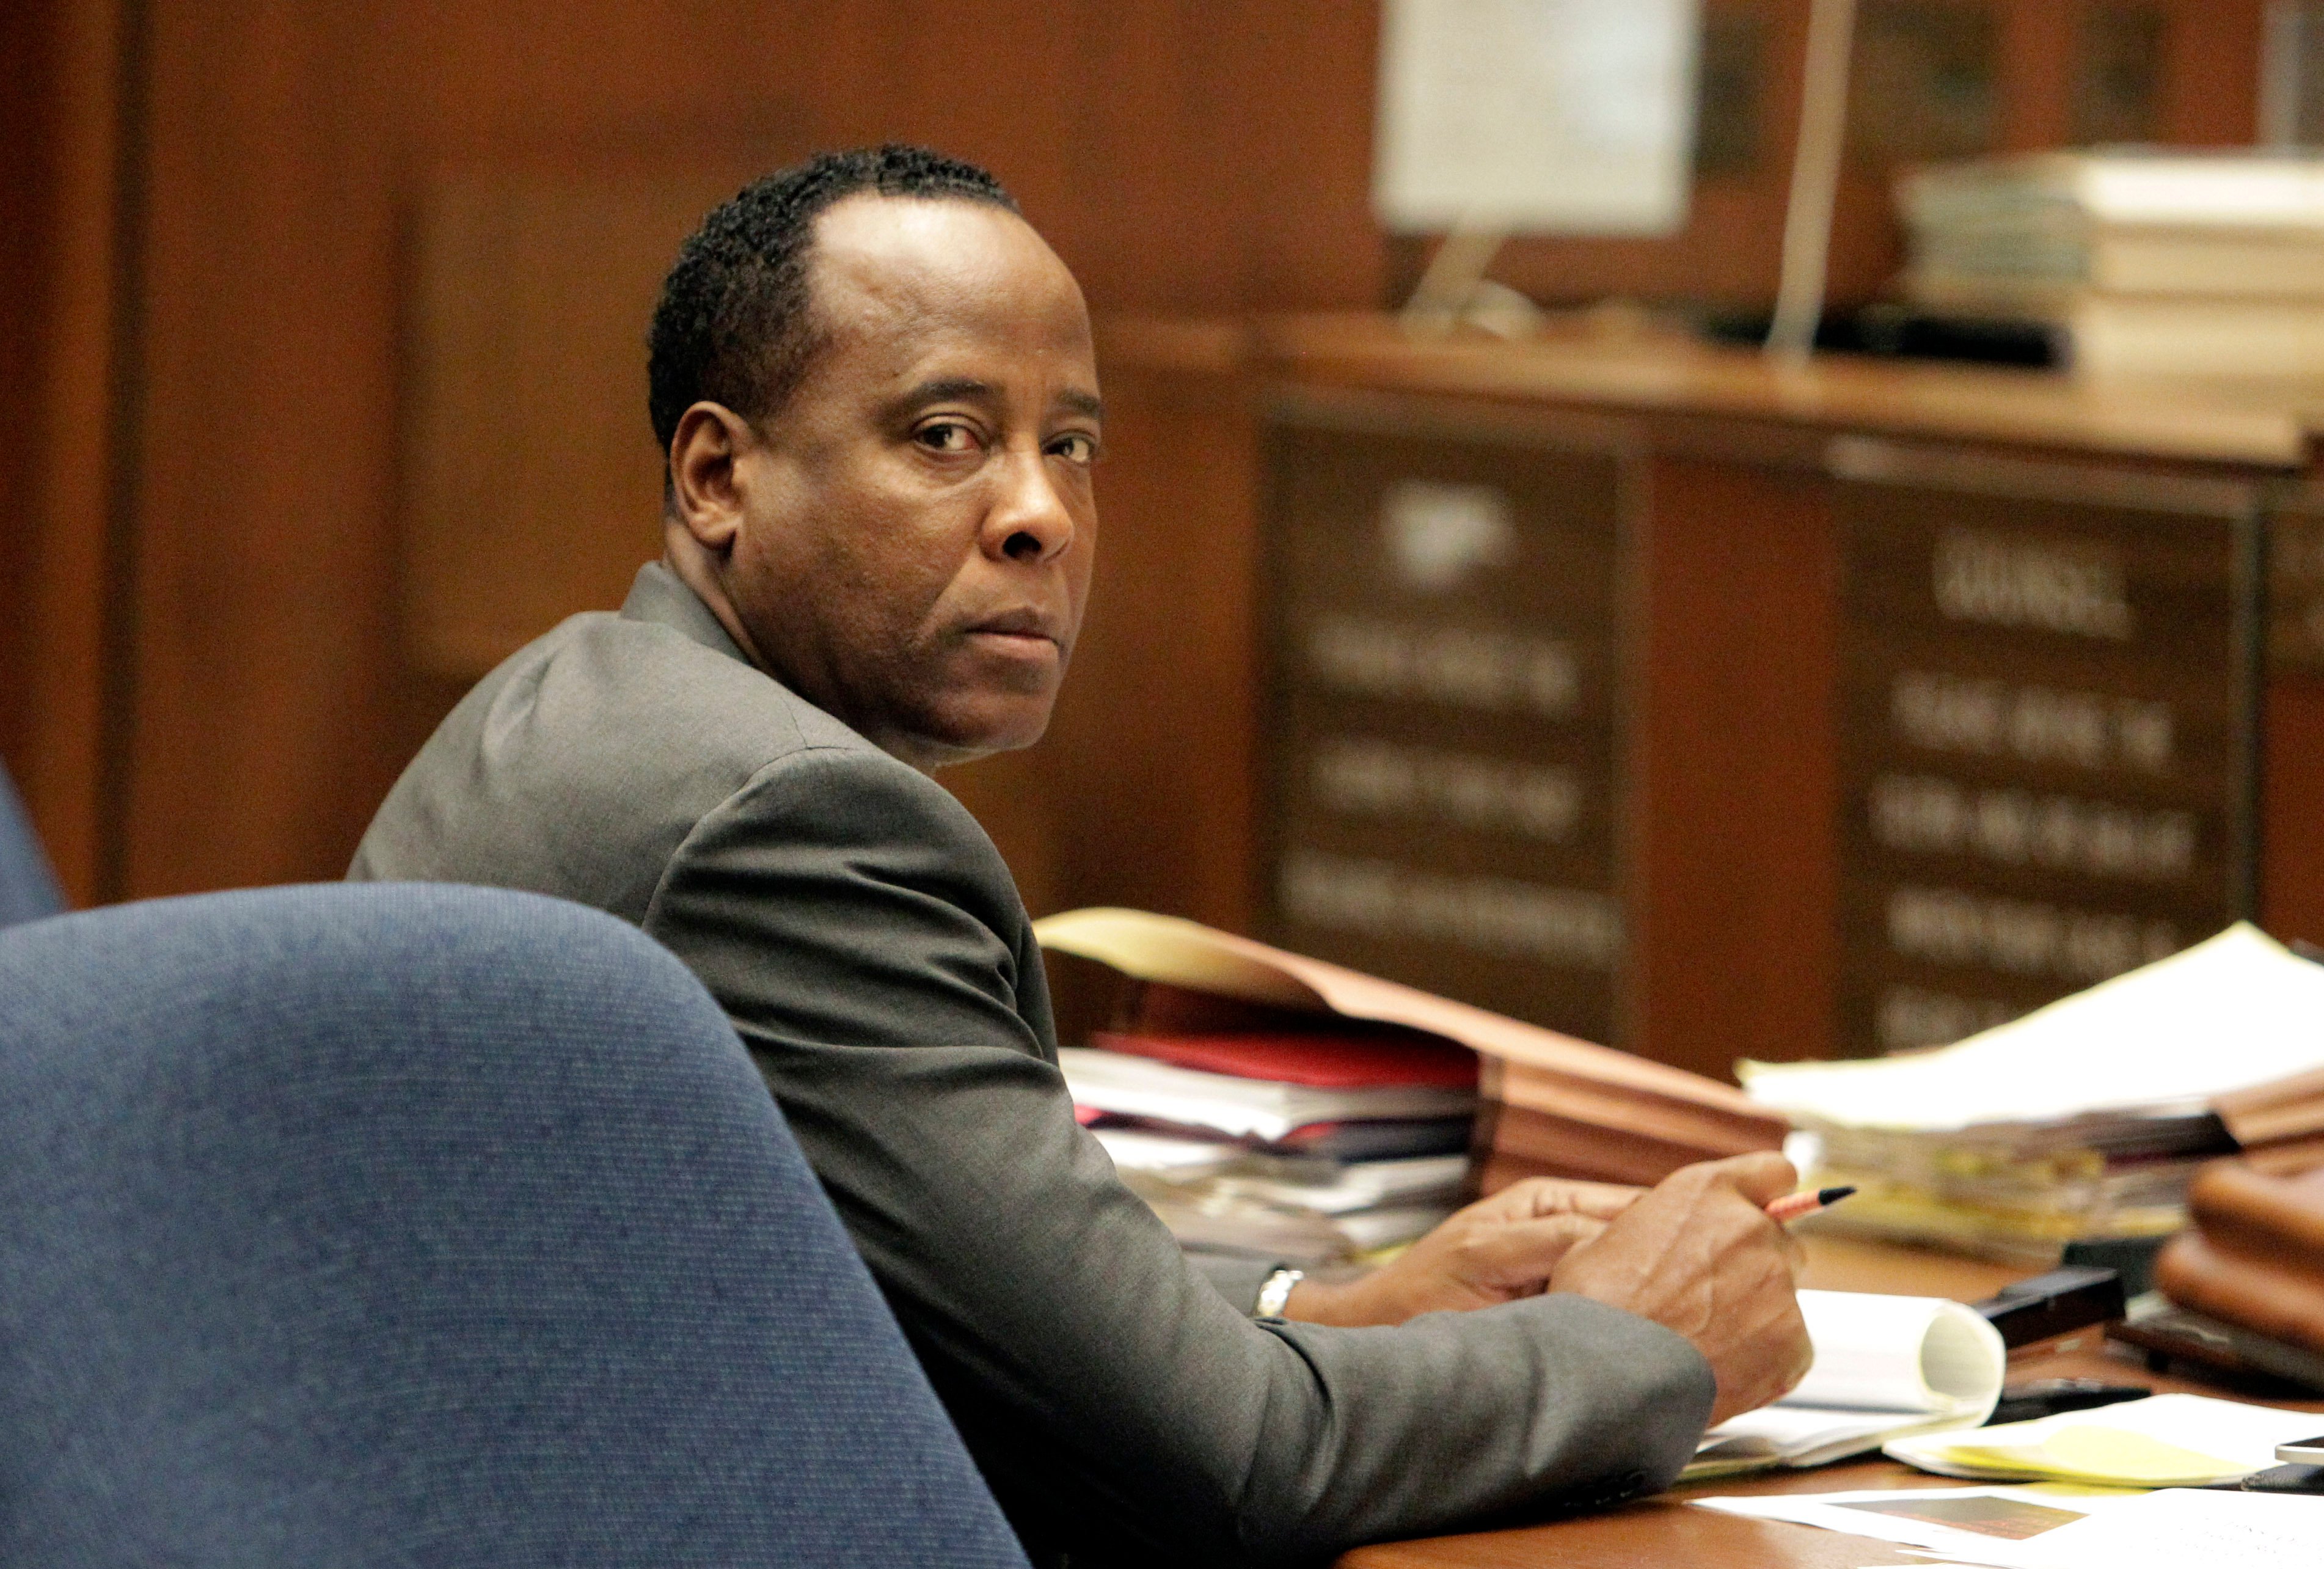 Dr. Conrad Murray seated in court during his involuntary manslaughter trial on Oct. 20, 2011